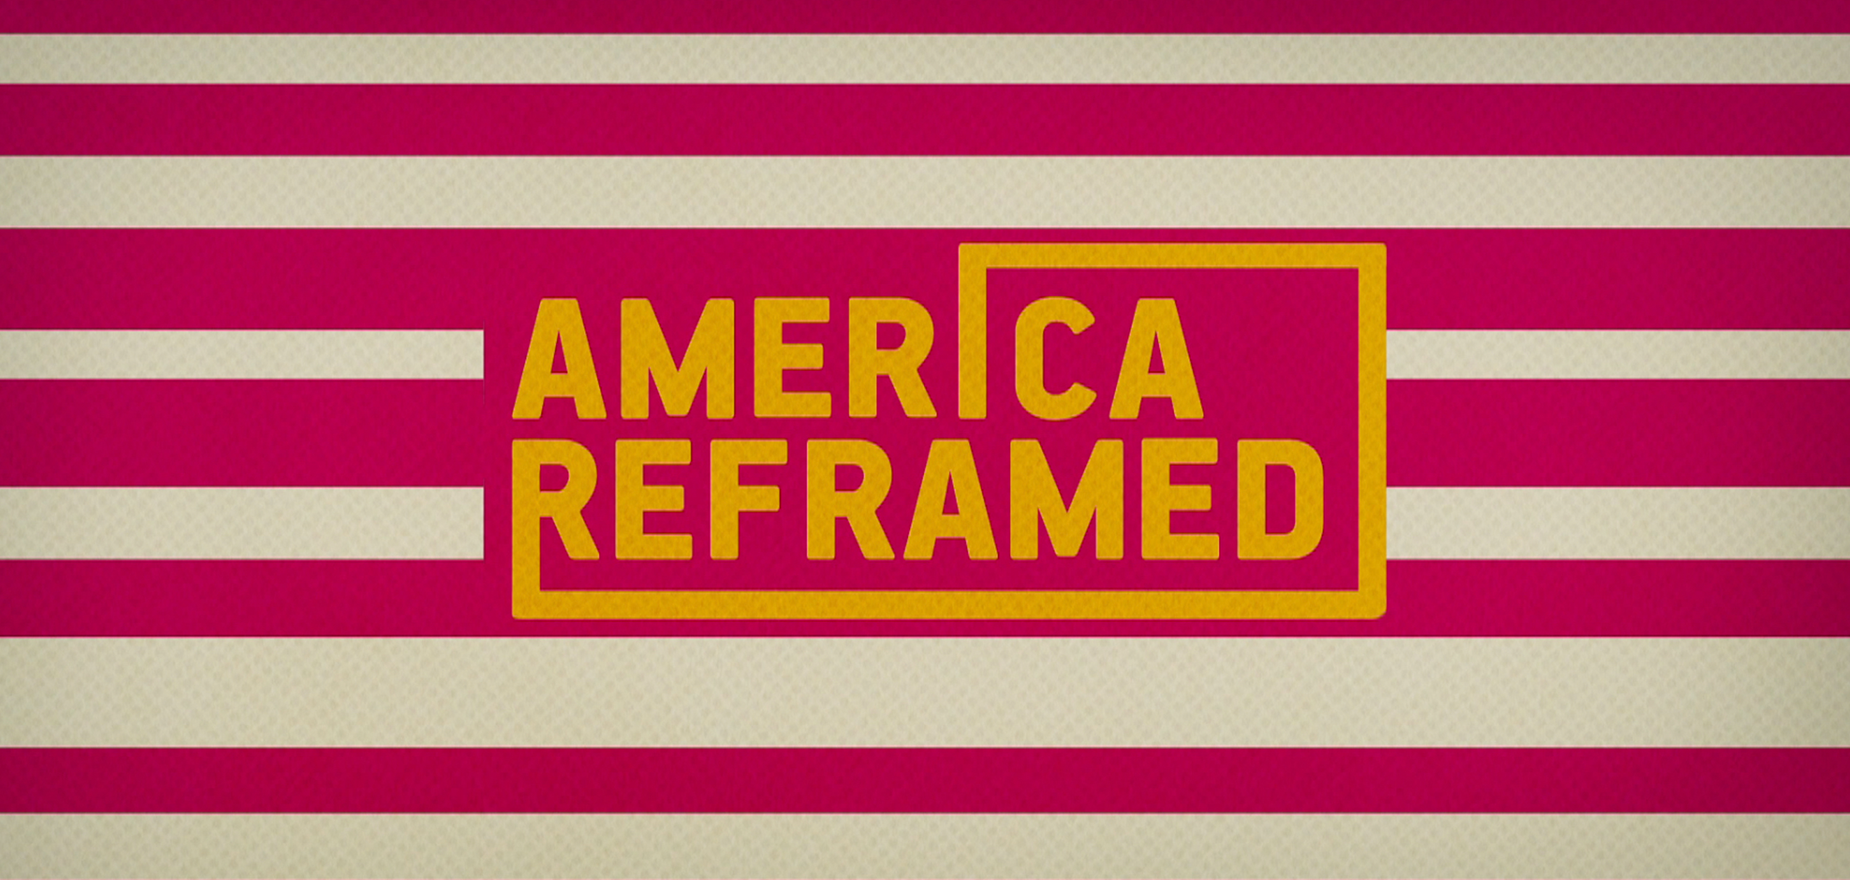 America Reframed: Deej - American Documentary, Inc., WORLD Channel, Rooy Media LLC, Independent Television Service (ITVS)